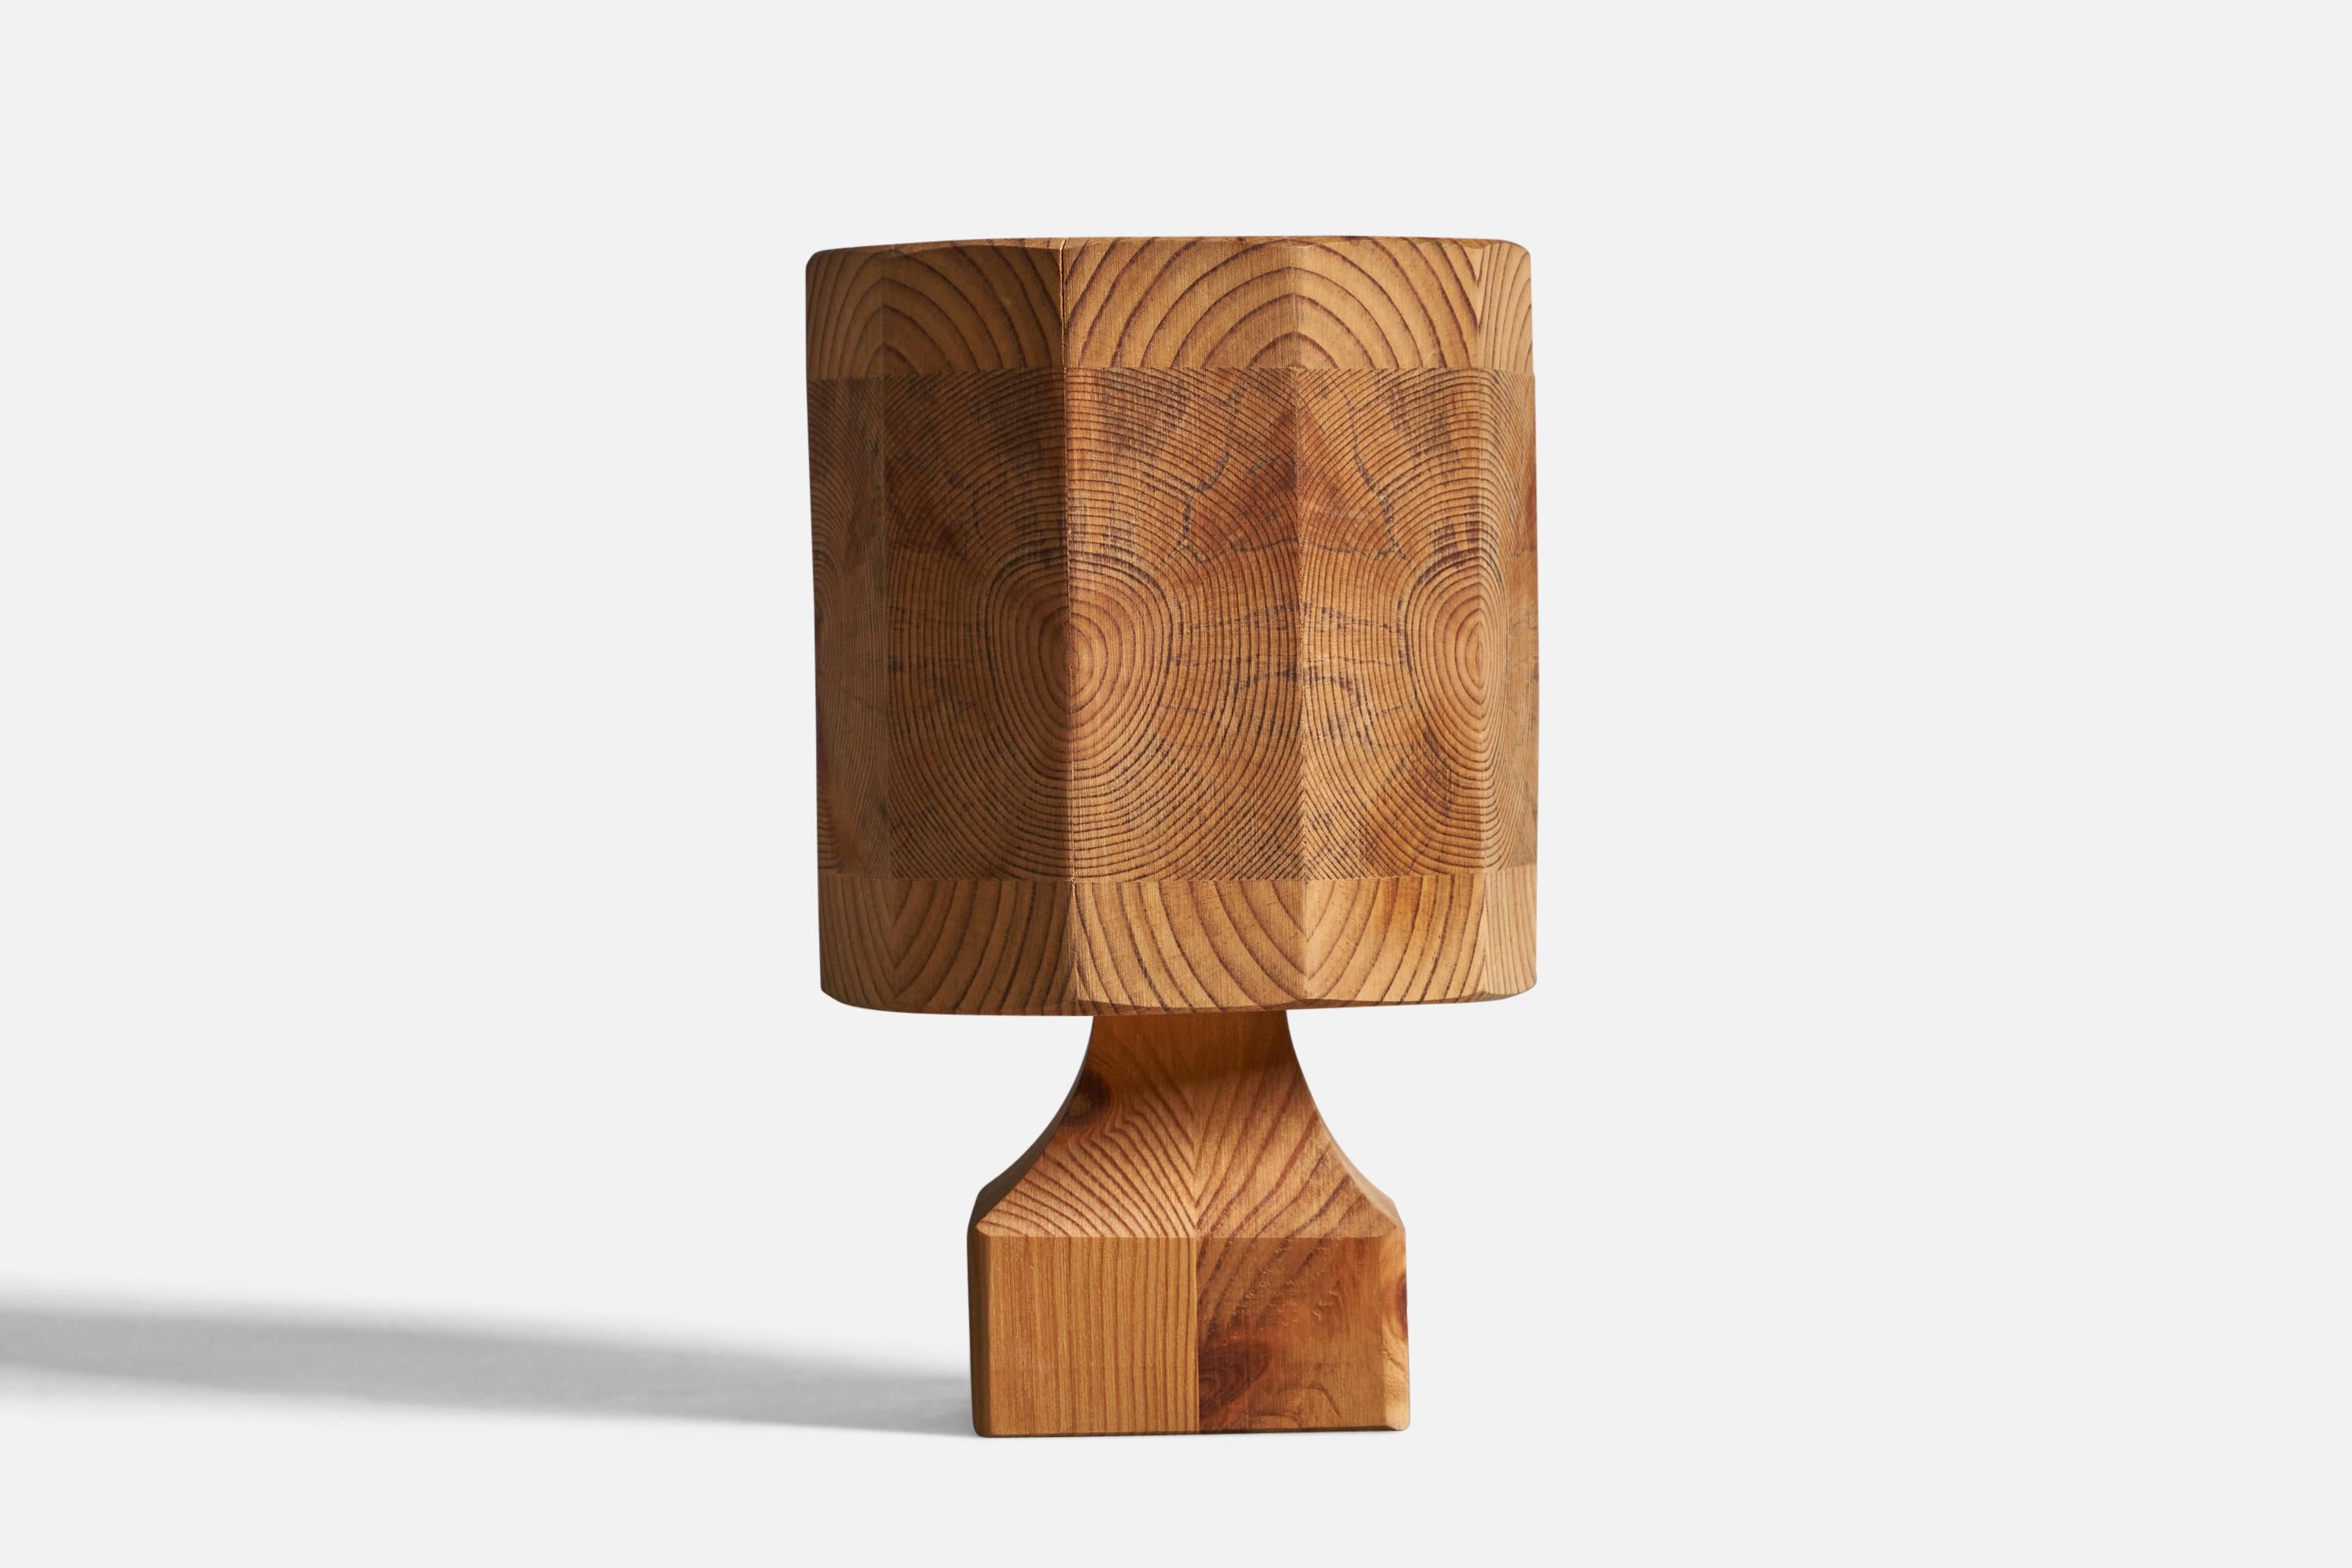 A pine table lamp designed and produced in Sweden, 1970s.

Overall Dimensions (inches): 8.25